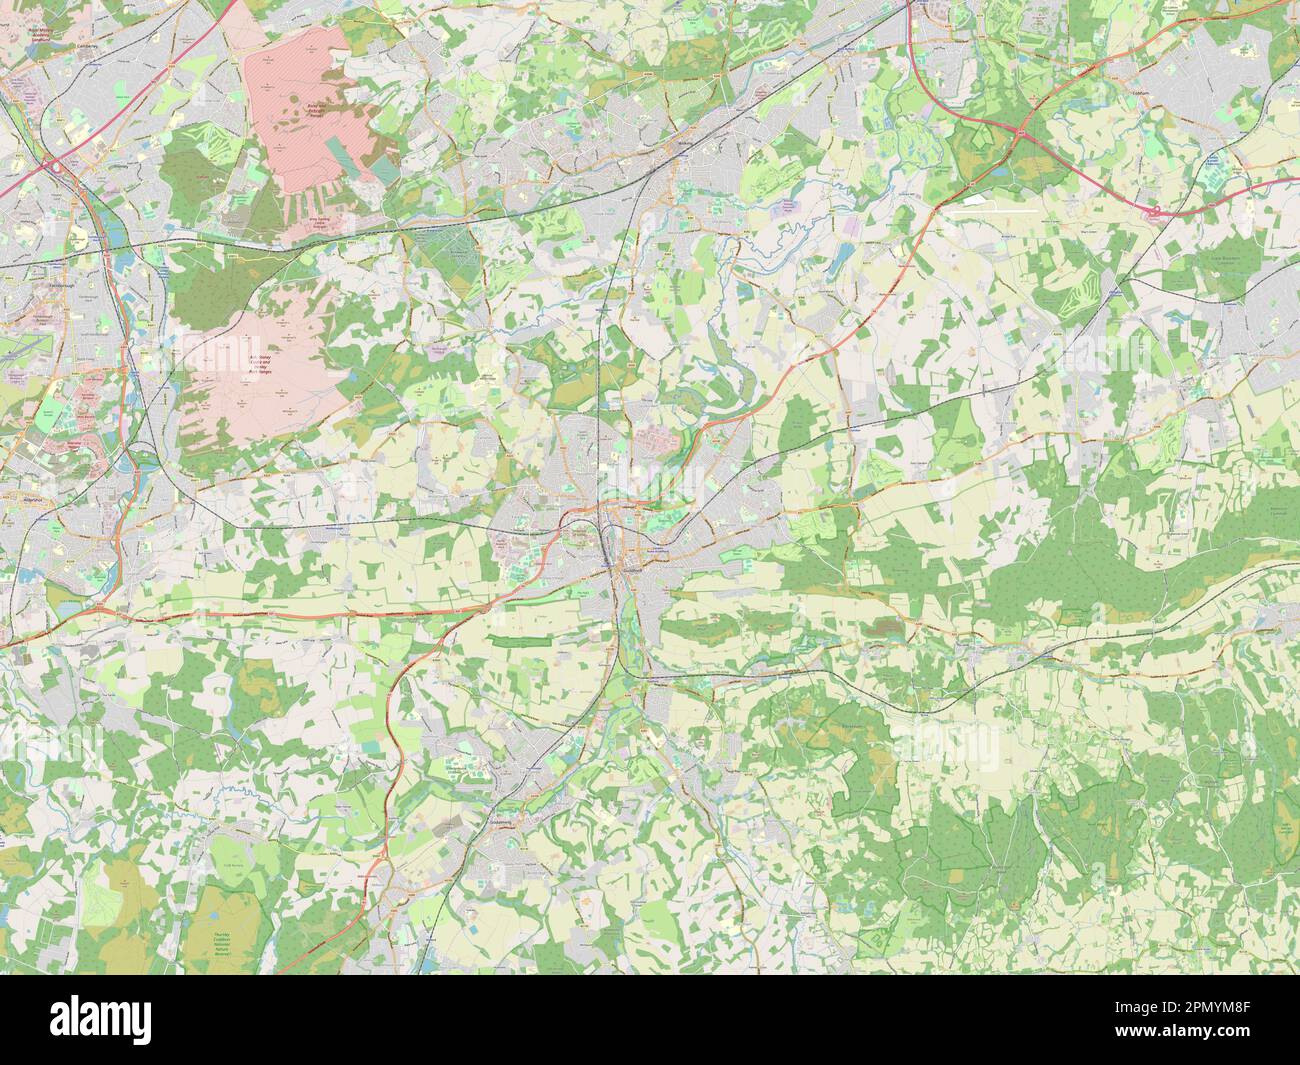 Guildford, non metropolitan district of England - Great Britain. Open Street Map Stock Photo